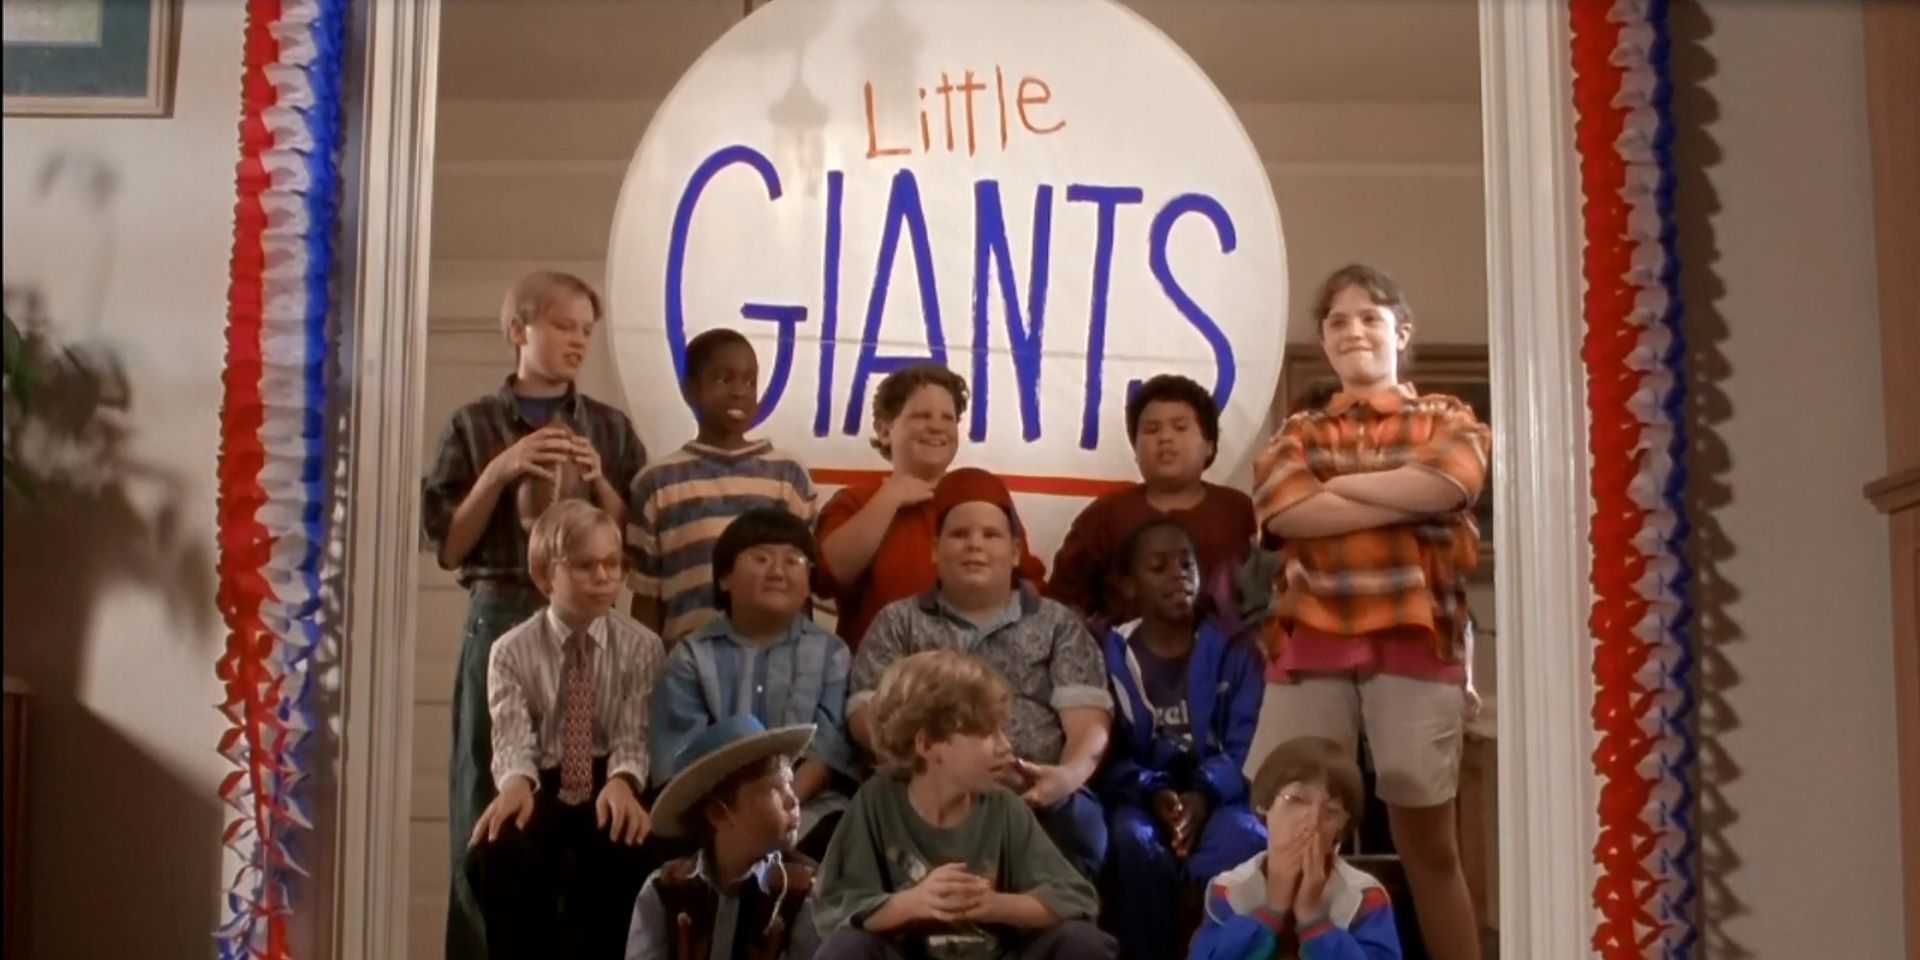 The cast of The Little Giants posing together